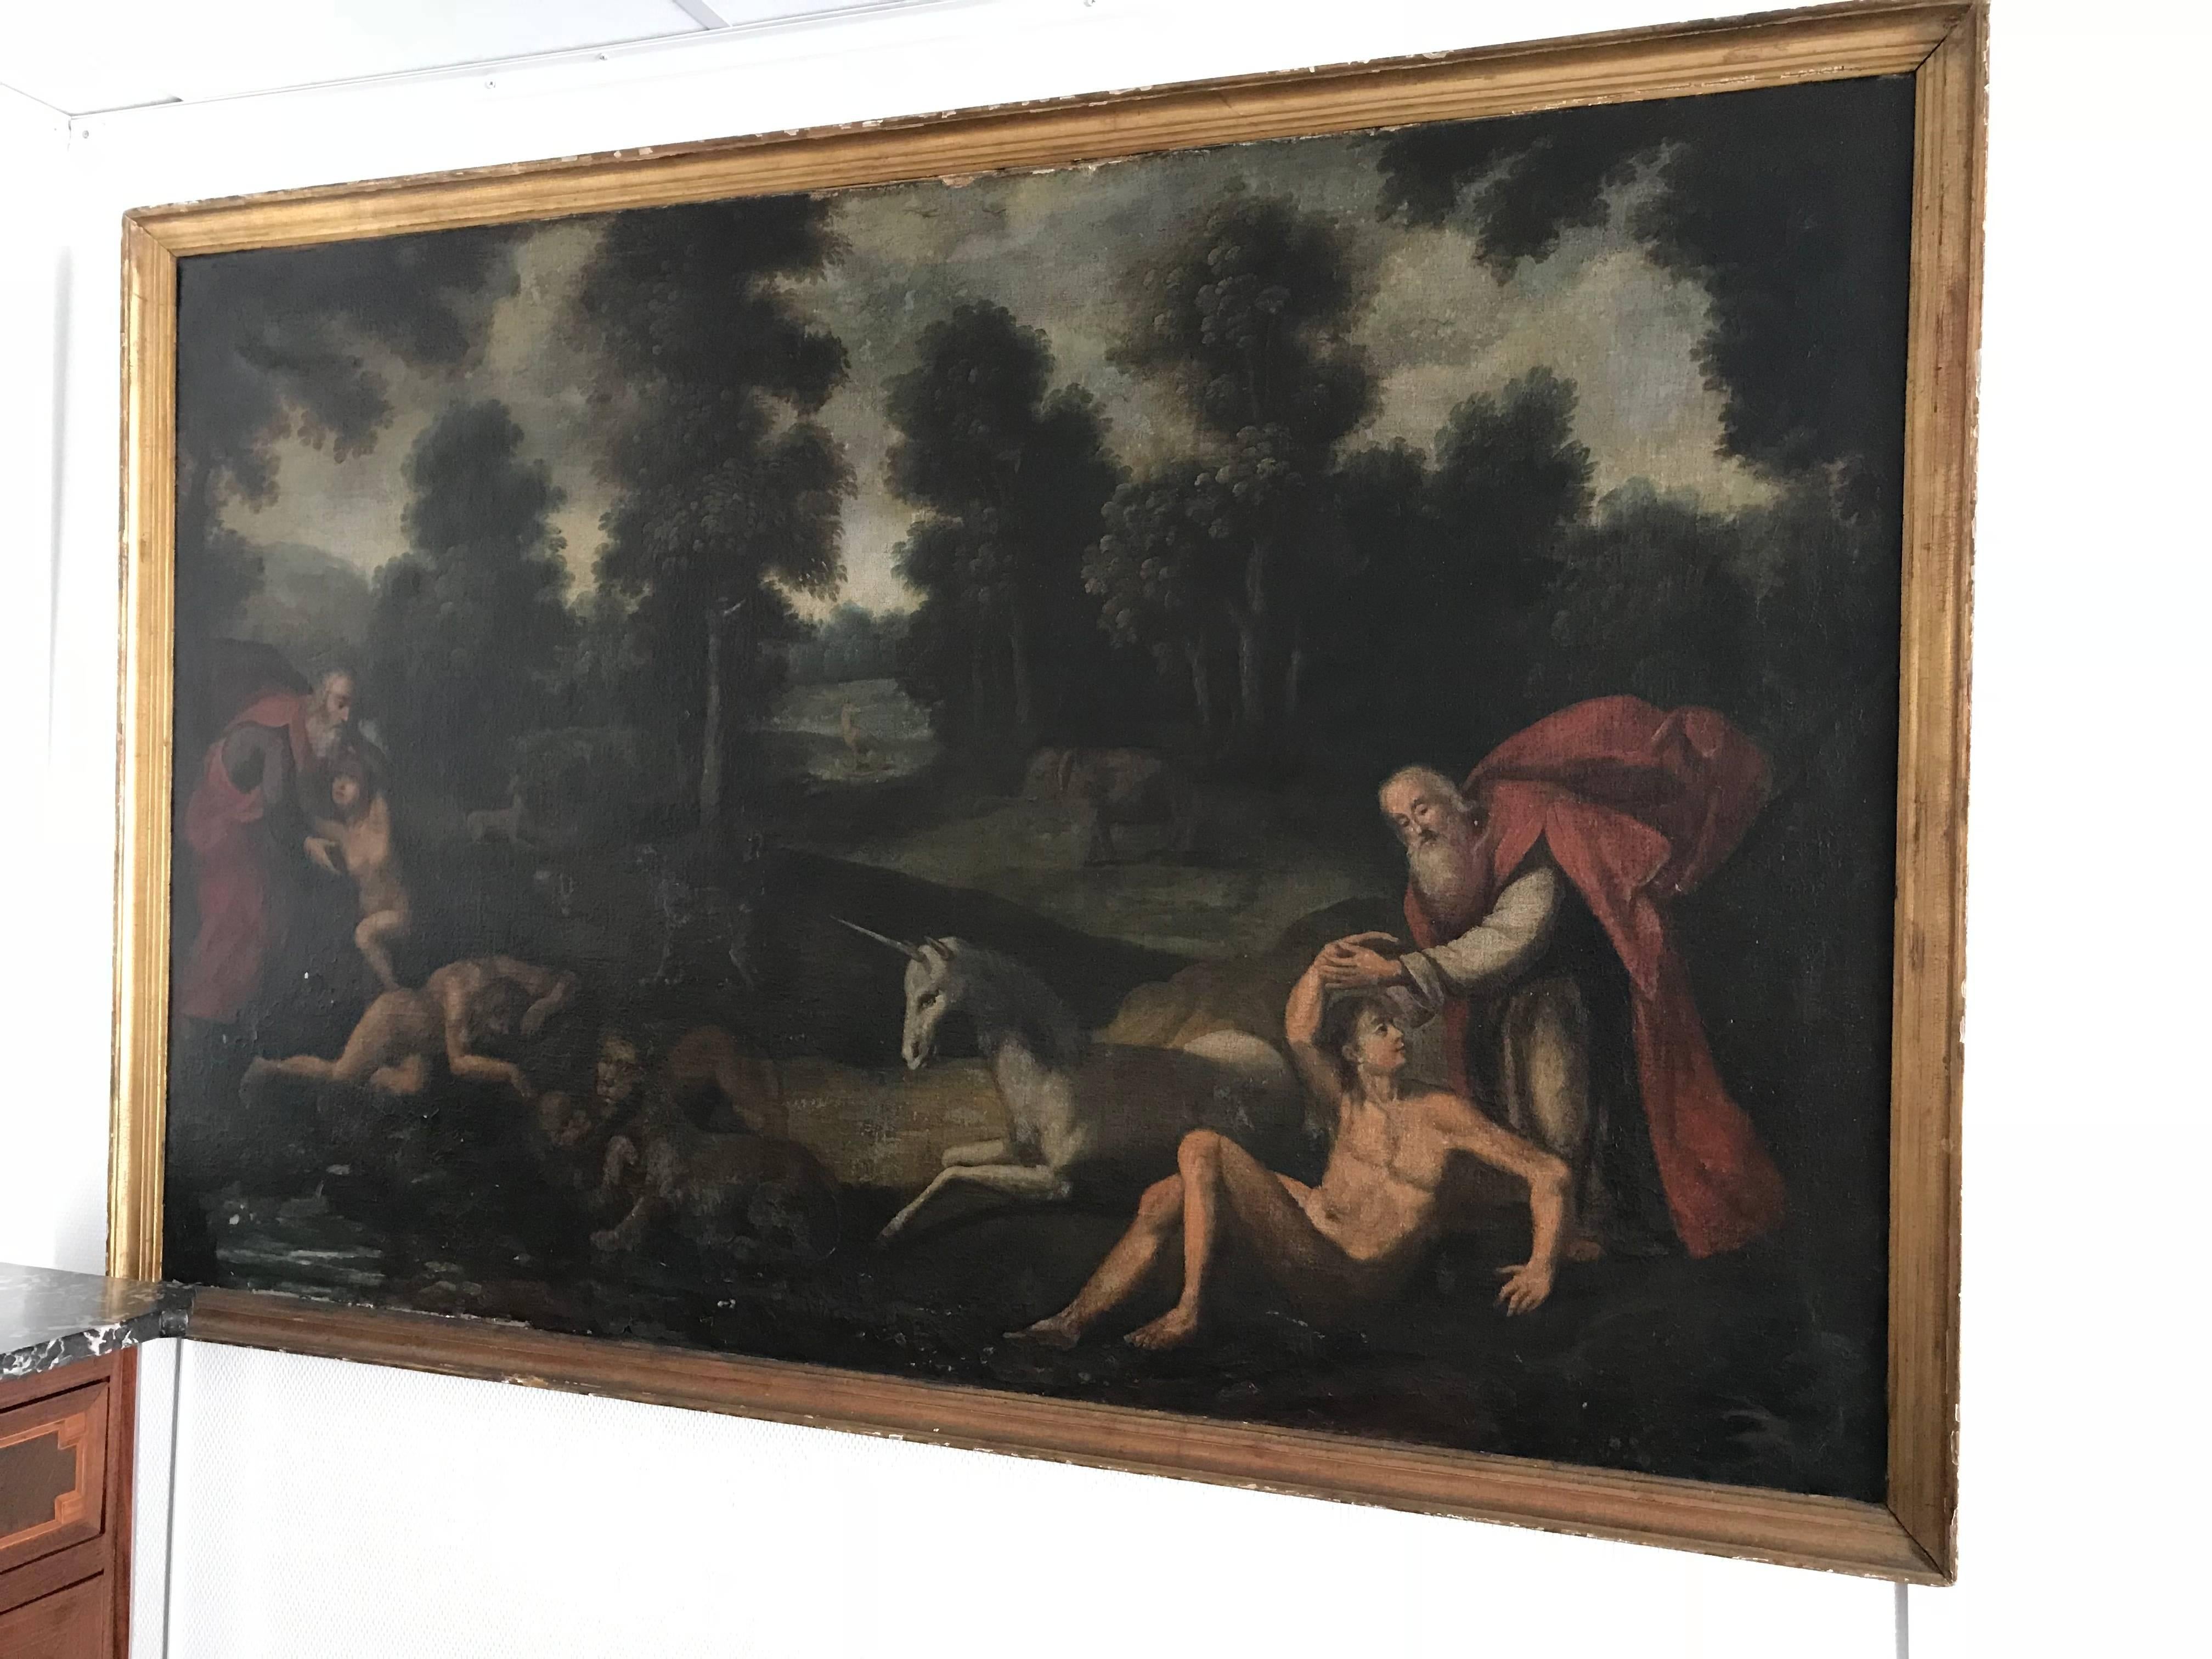 The Creation of Adam & Eve, 17th Century Flemish Old Master - Black Landscape Painting by Unknown